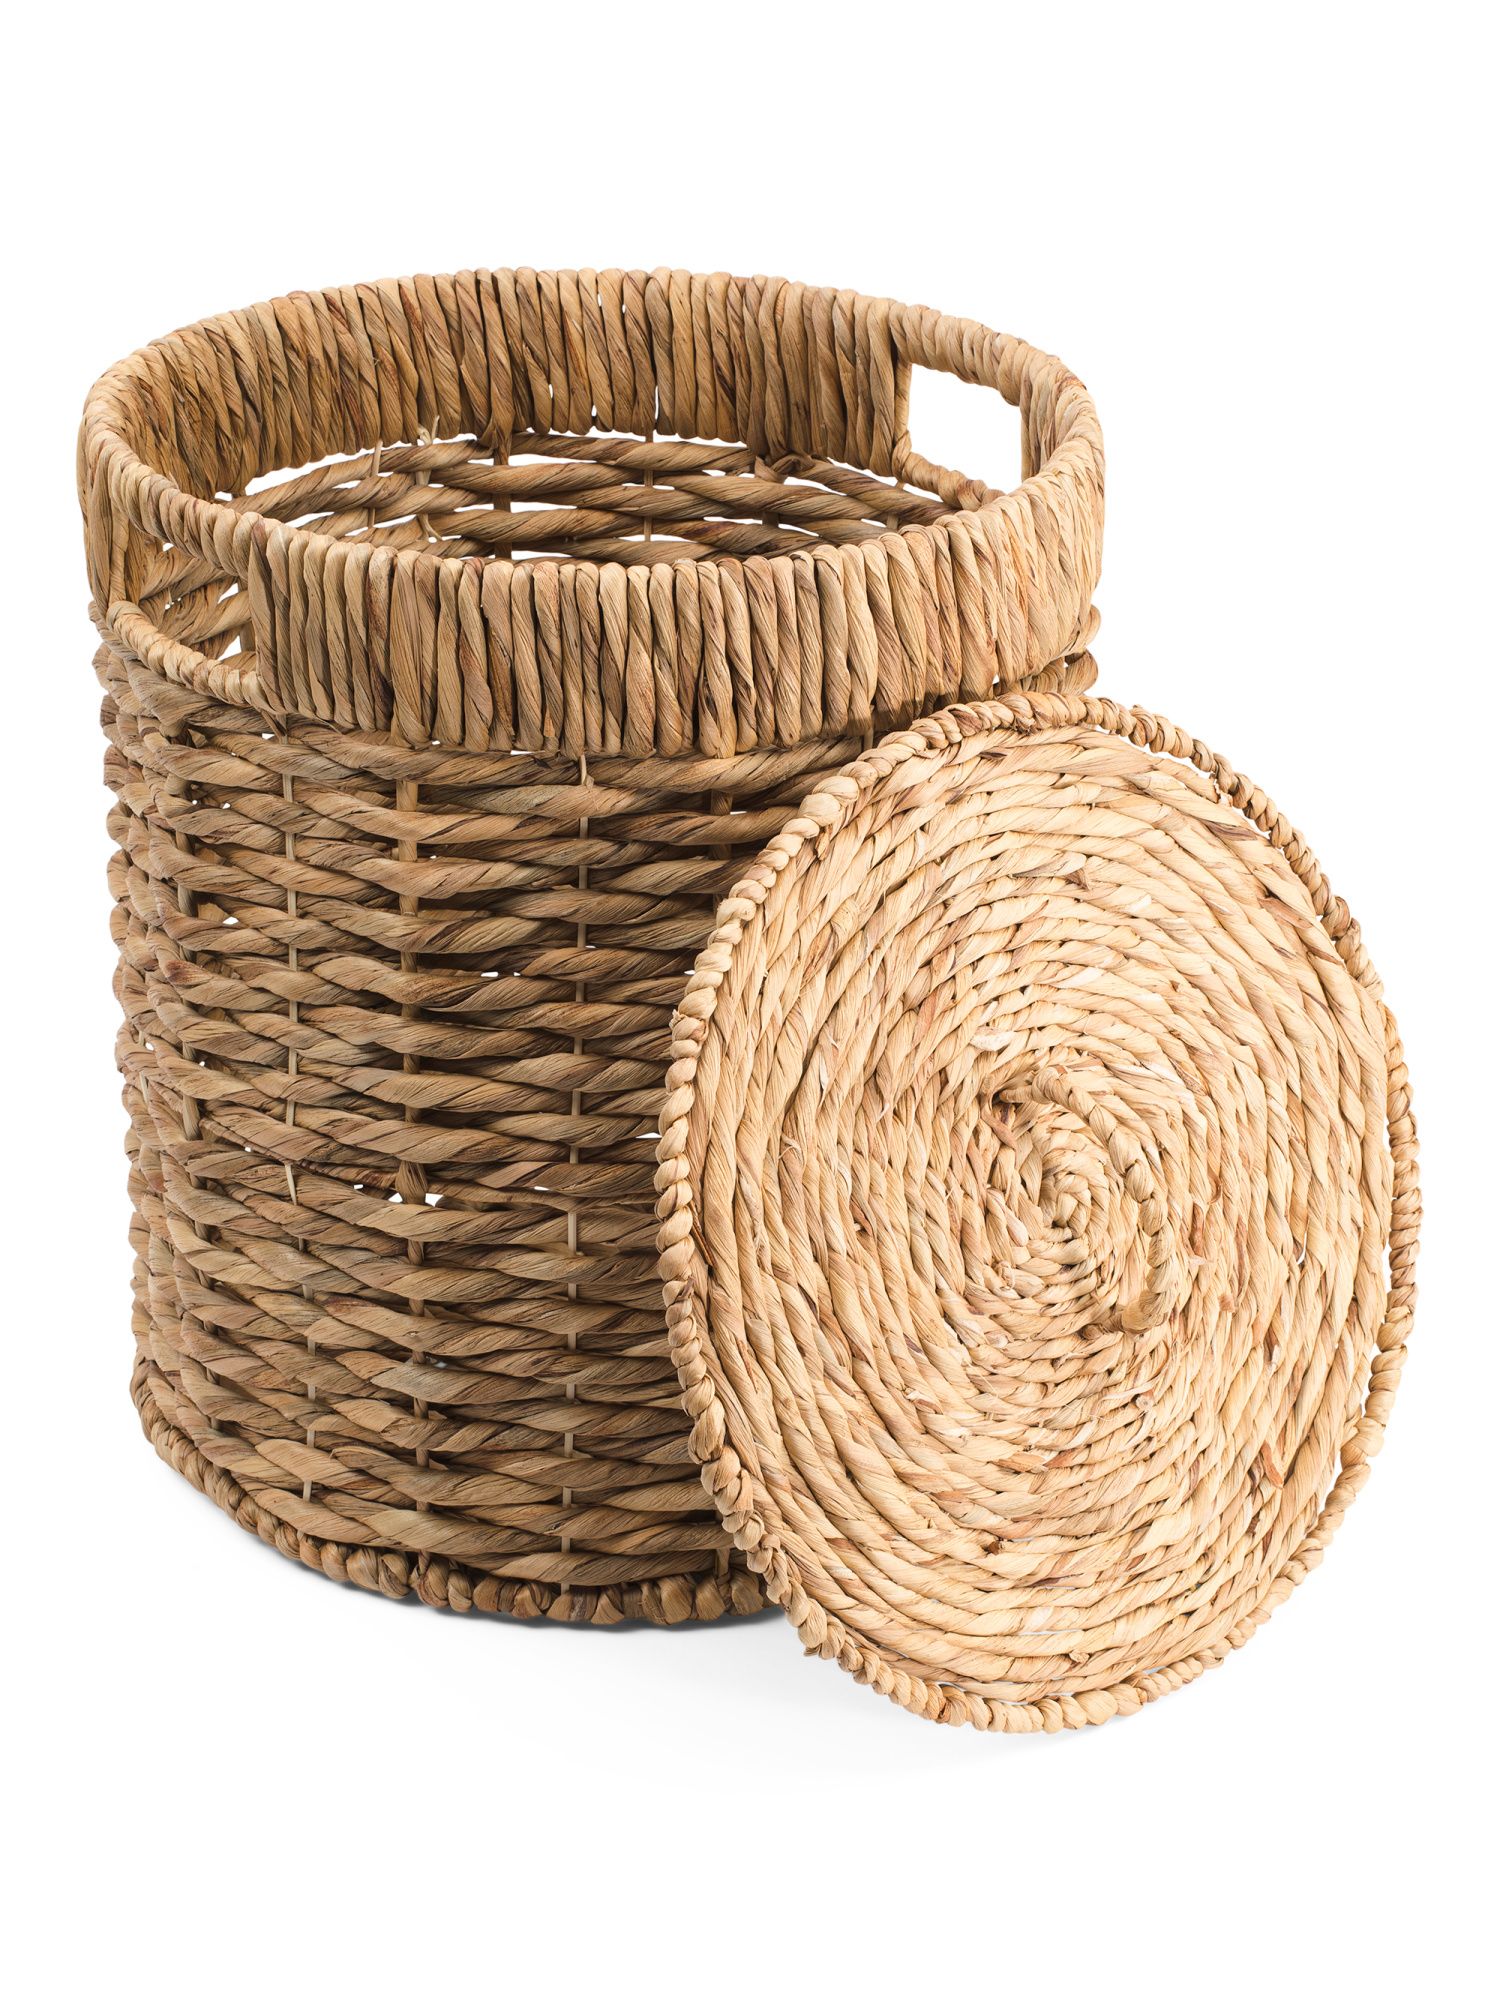 Medium Round Storage Basket With Lid And Cut Out Handles | Marshalls